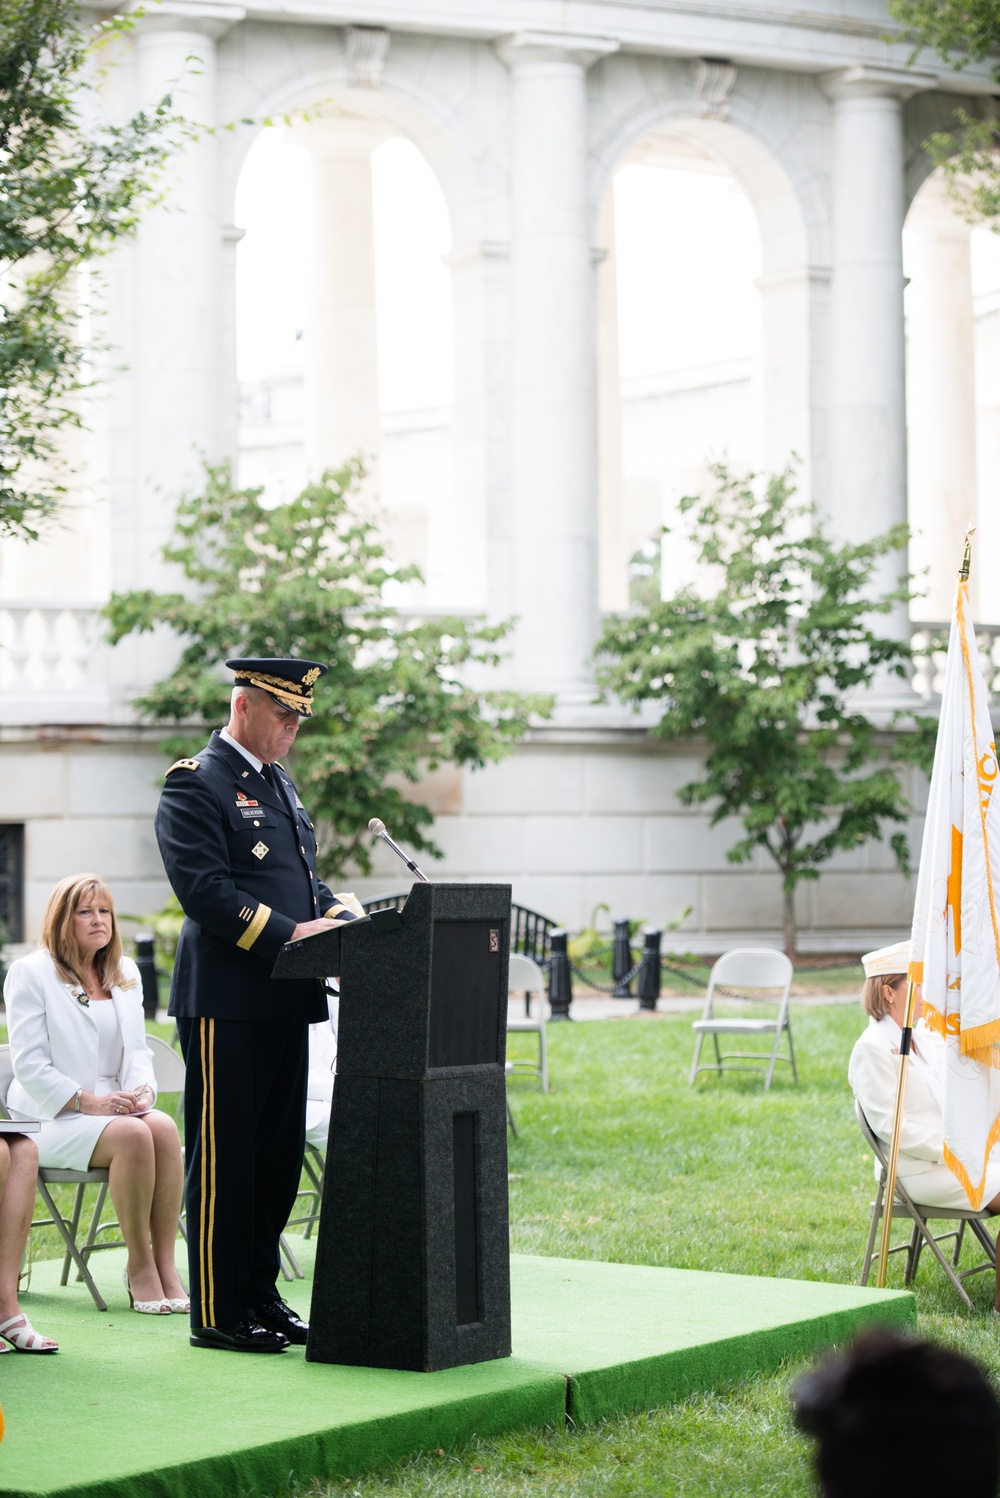 75th Annual Celebration of Gold Star Mother Sunday is held in Arlington National Cemetery